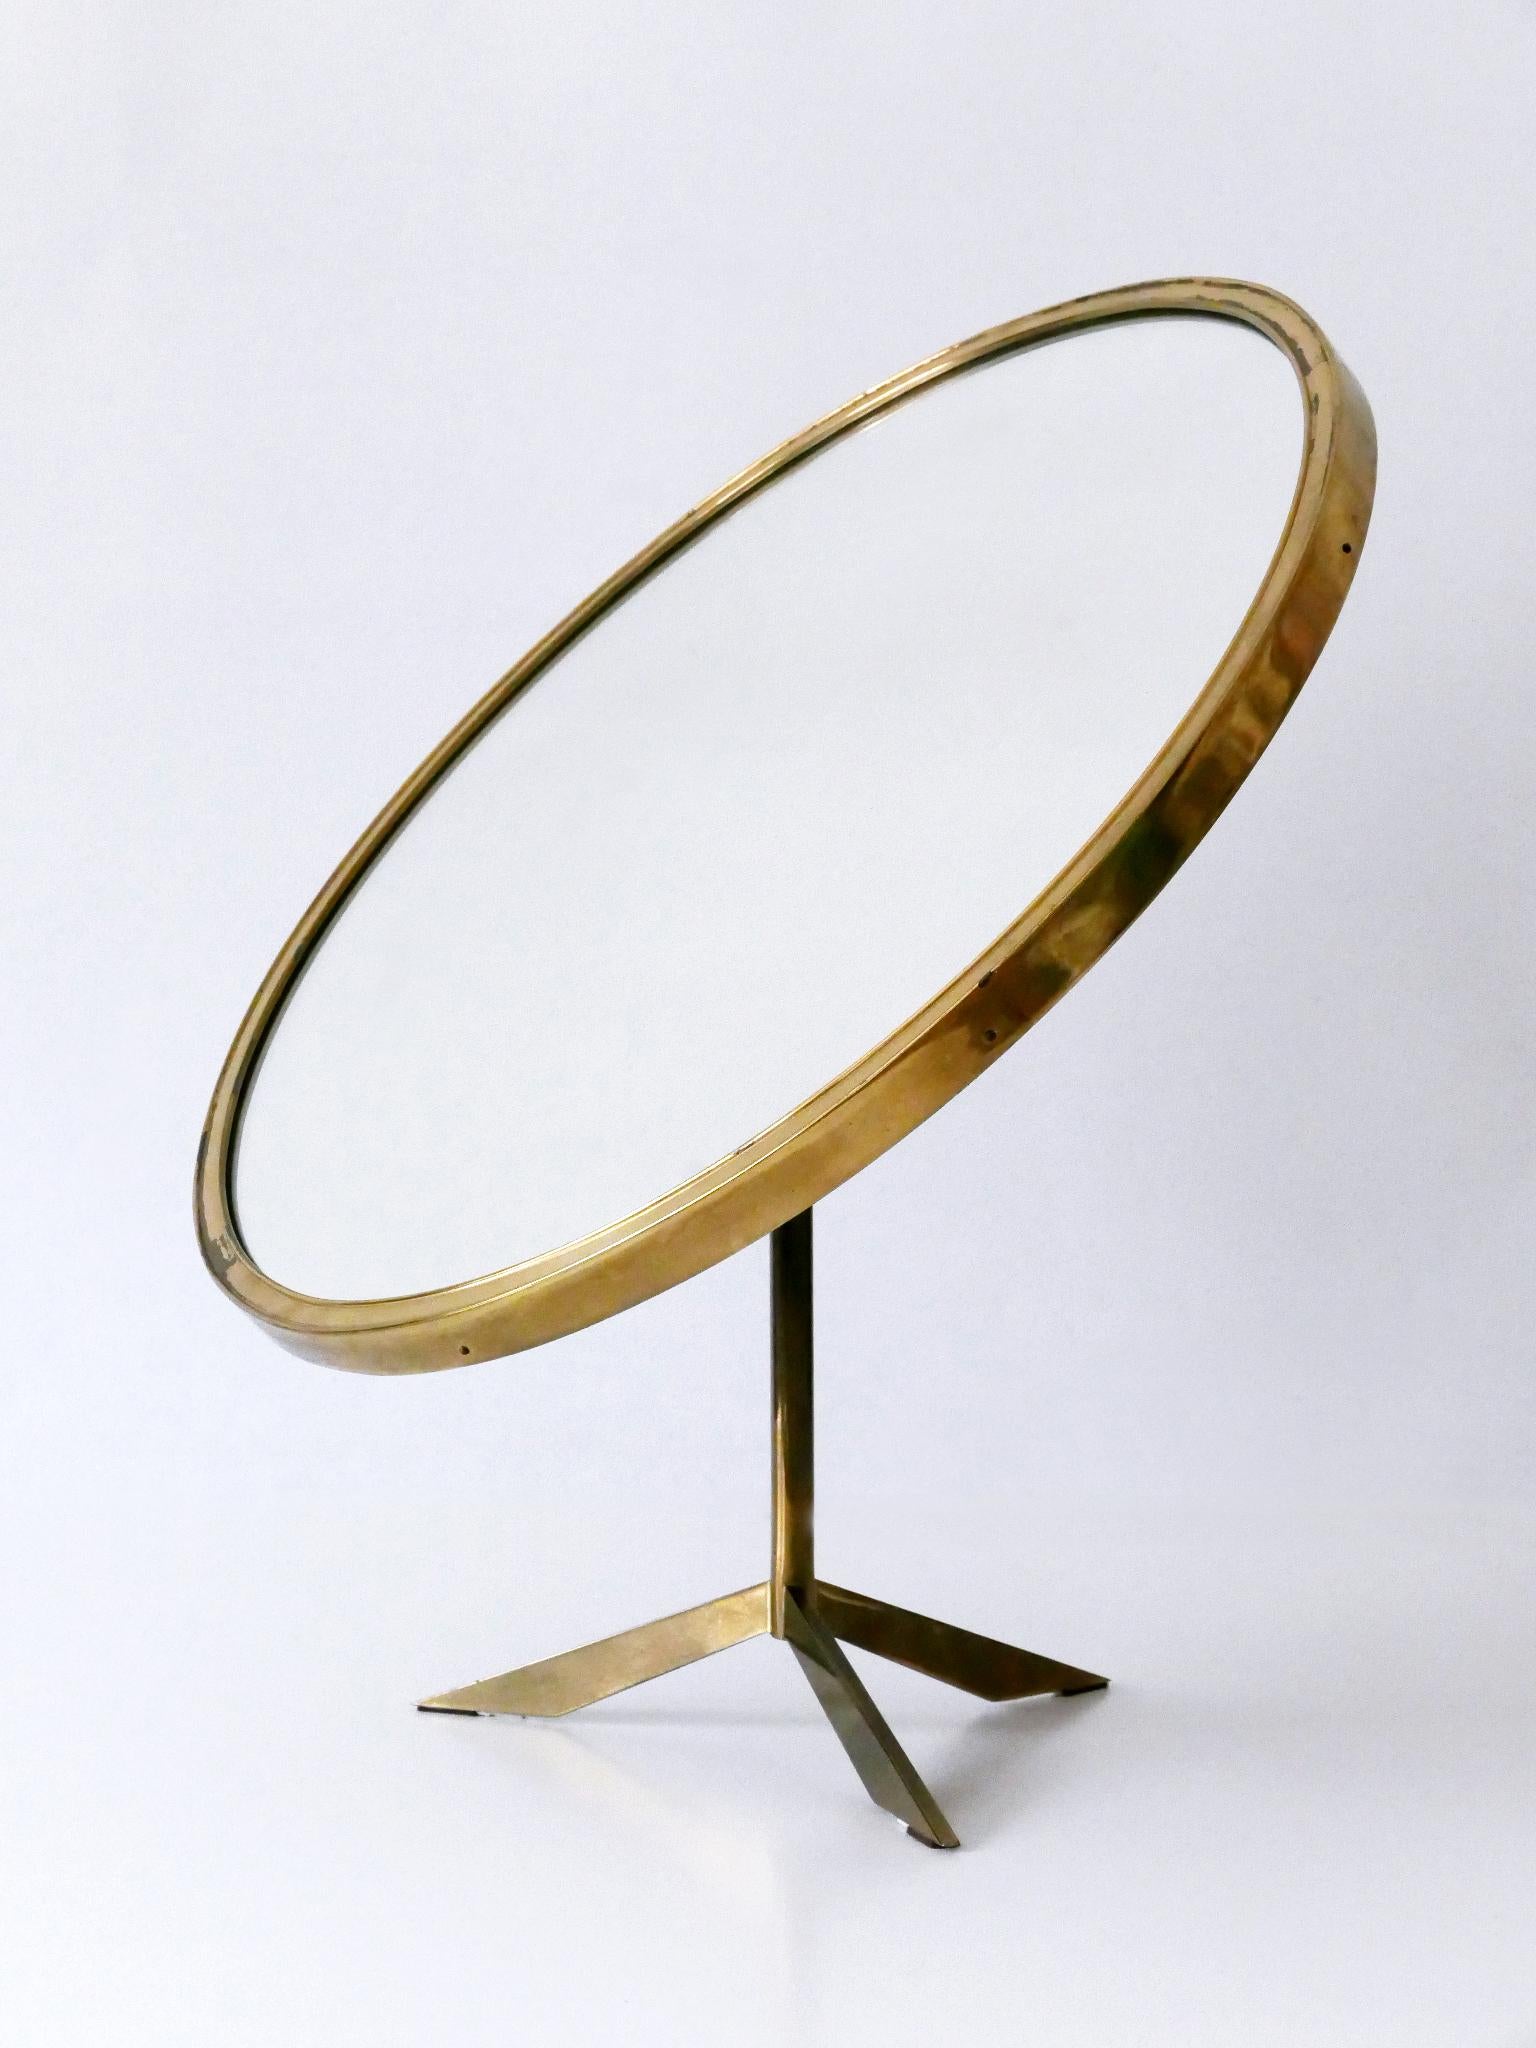 Elegant Mid-Century Modern Wall or Vanity Mirror by Zierform Germany 1950s For Sale 6